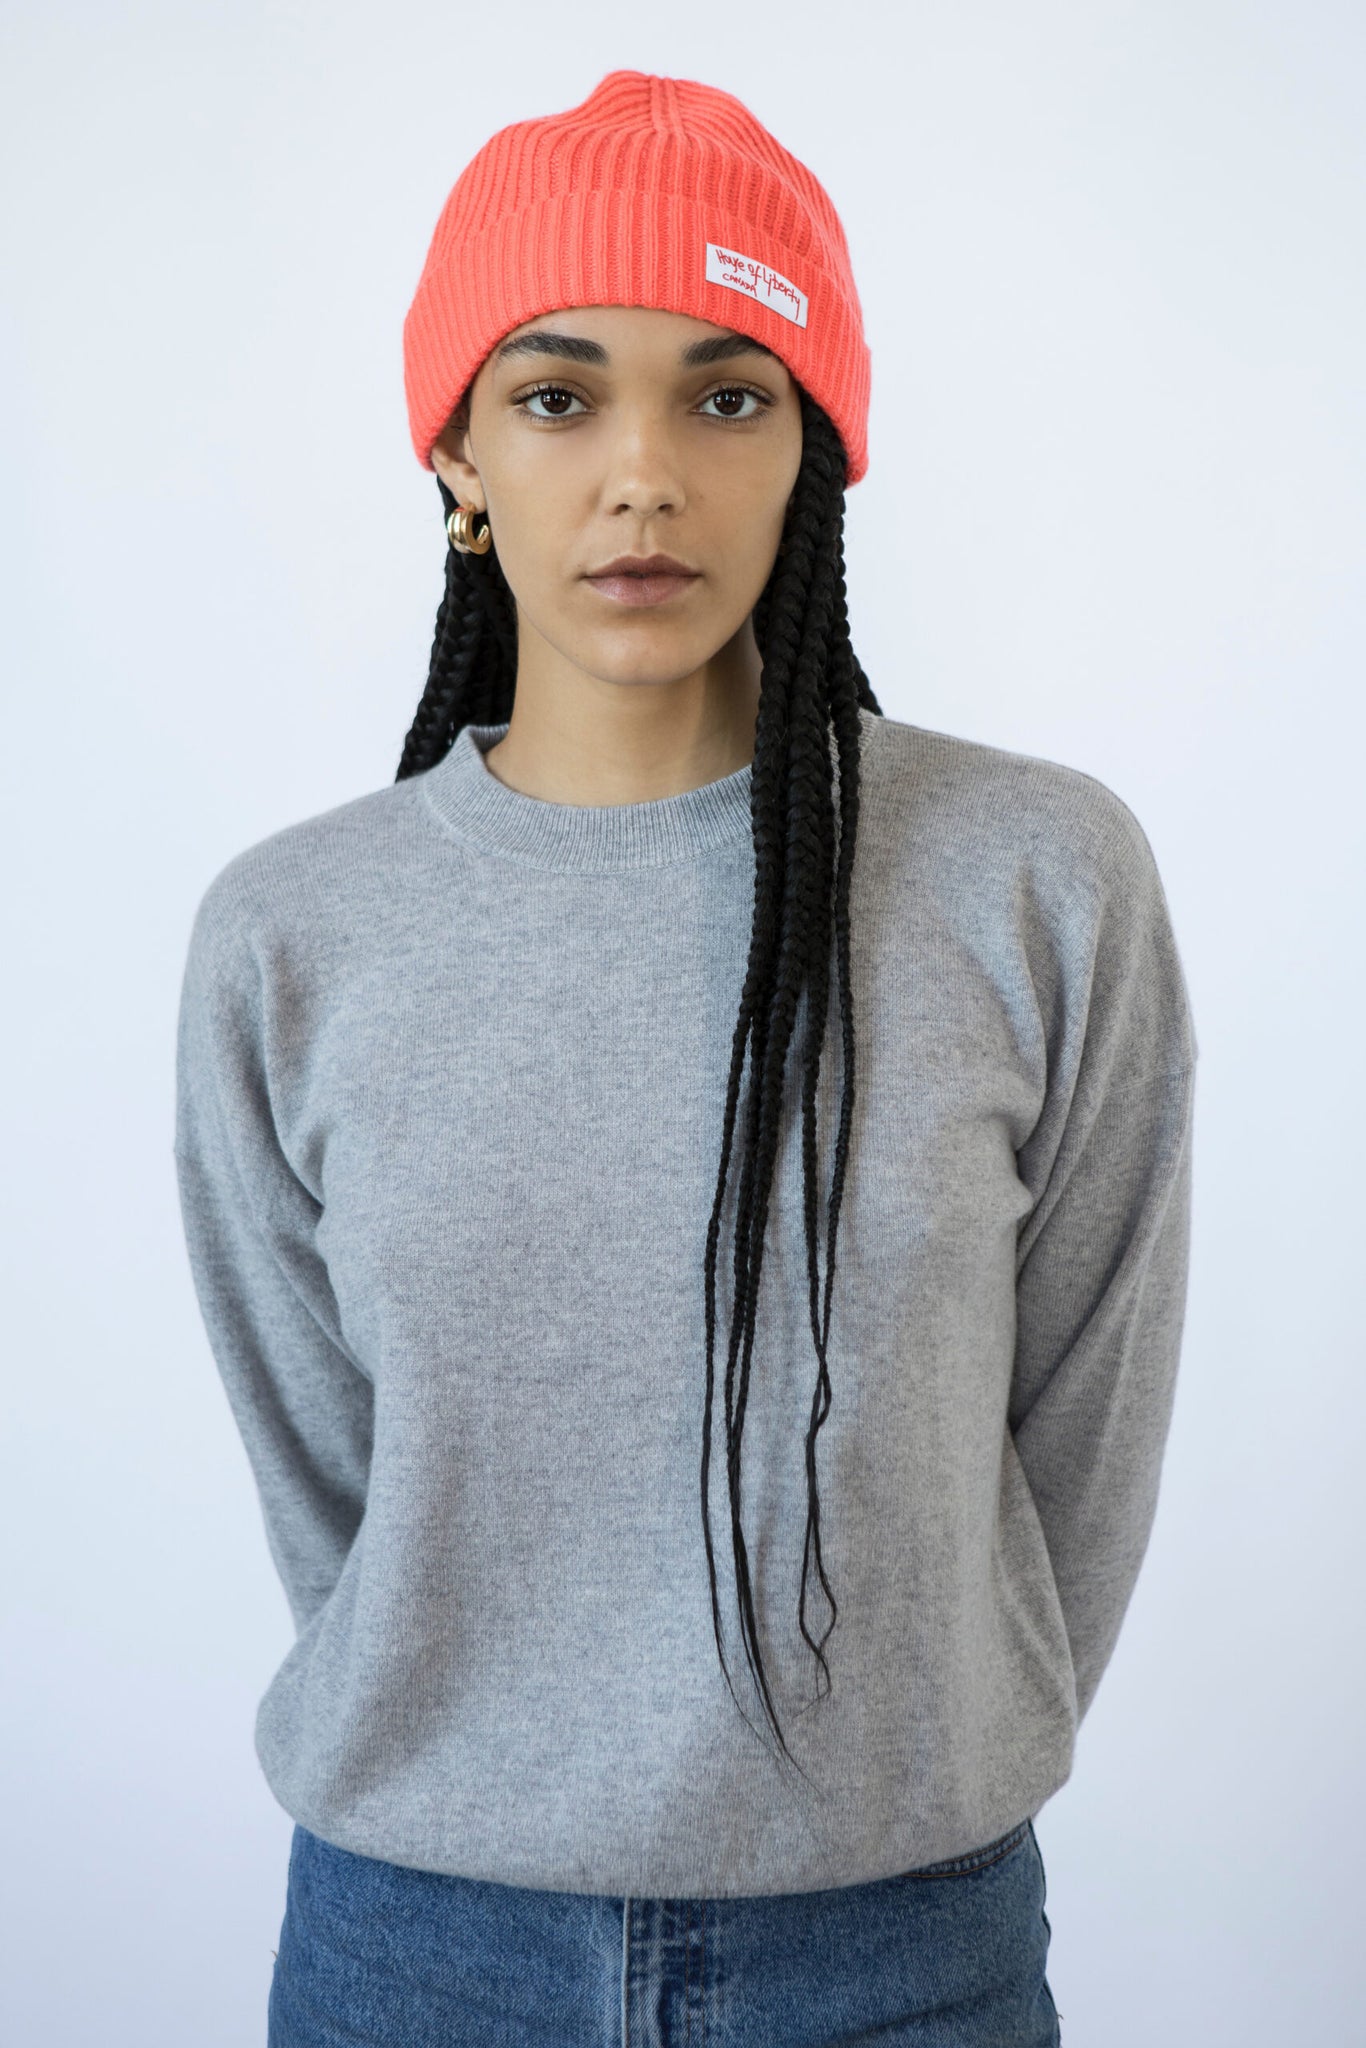 UNIKONCEPT Lifestyle Boutique and Lounge; House of Liberty Cashmere Roxy Ribbed Beanie in colour Chili featured on a model